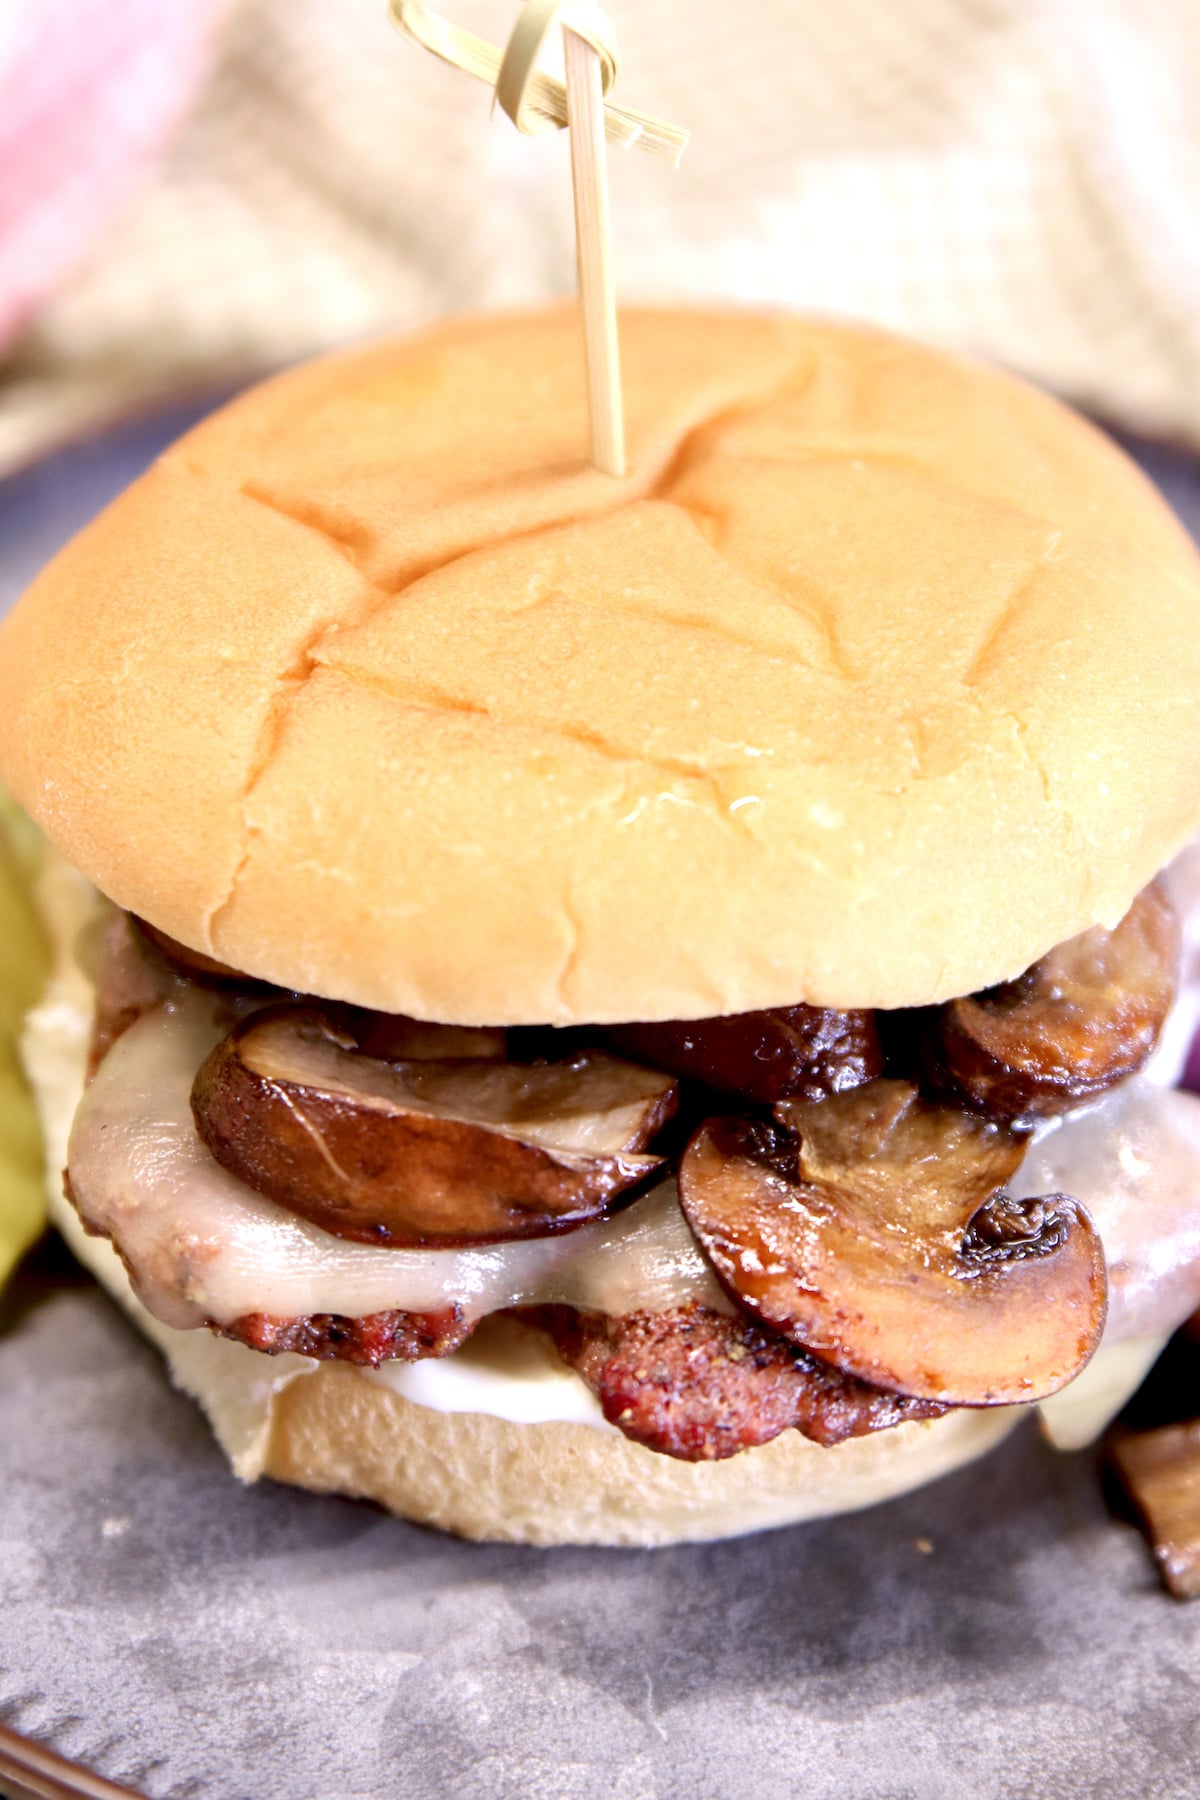 Grilled burger with mushrooms.